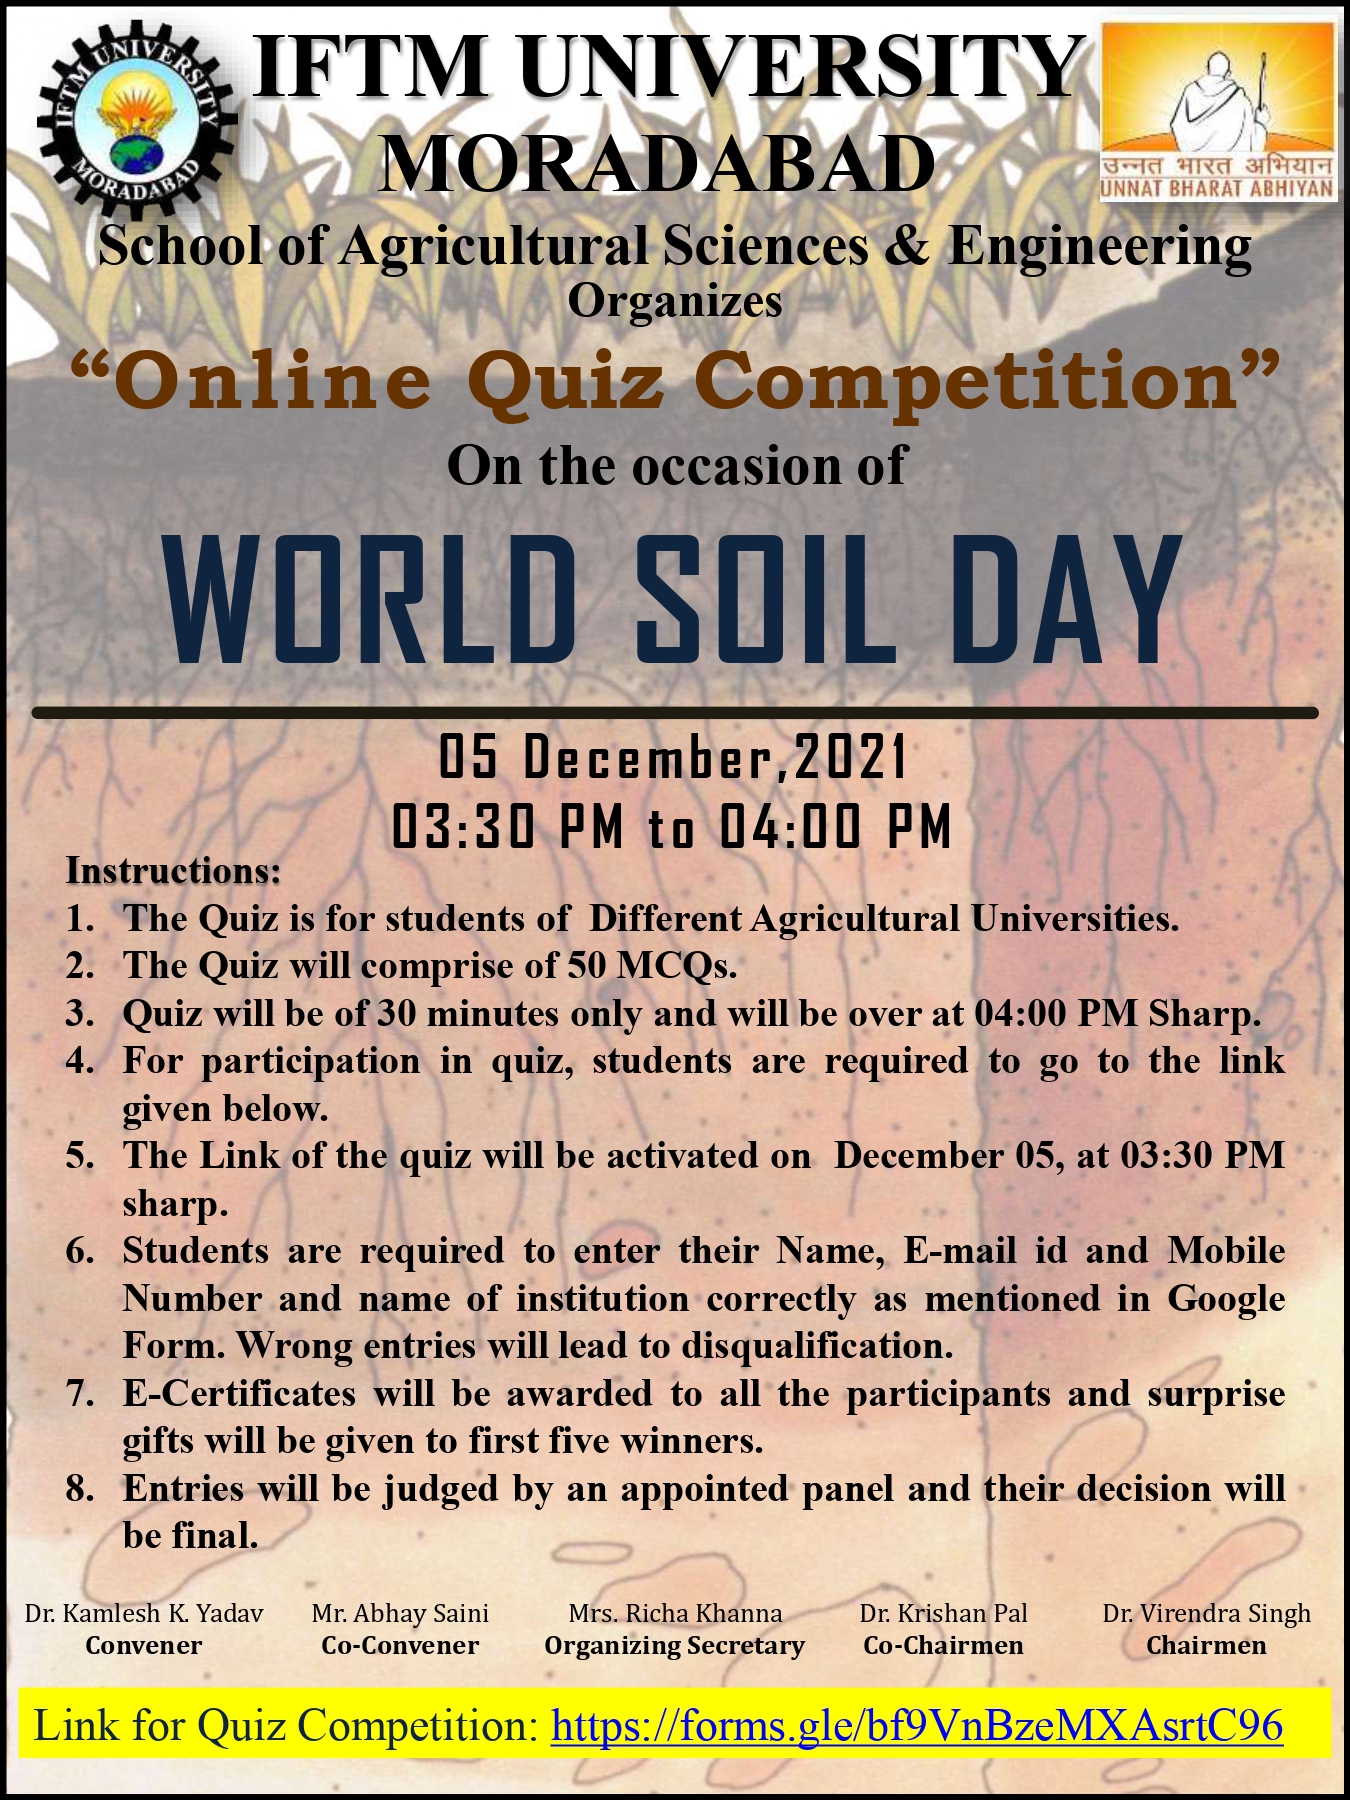 Online Quiz Competition on World Soil Day